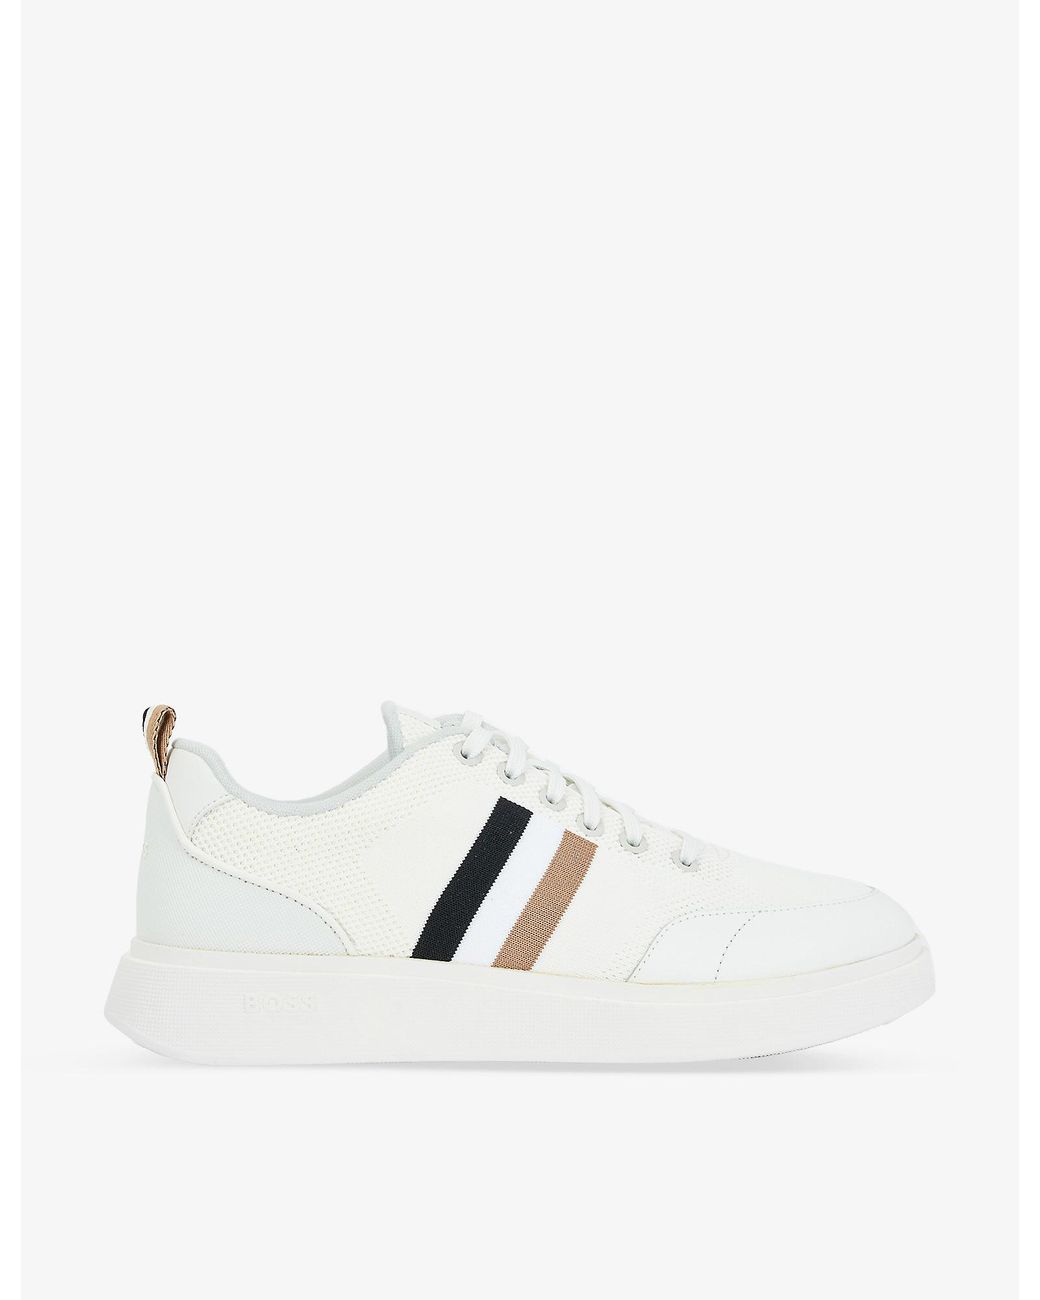 BOSS by HUGO BOSS Cupsole Striped Woven Trainers in White for Men | Lyst